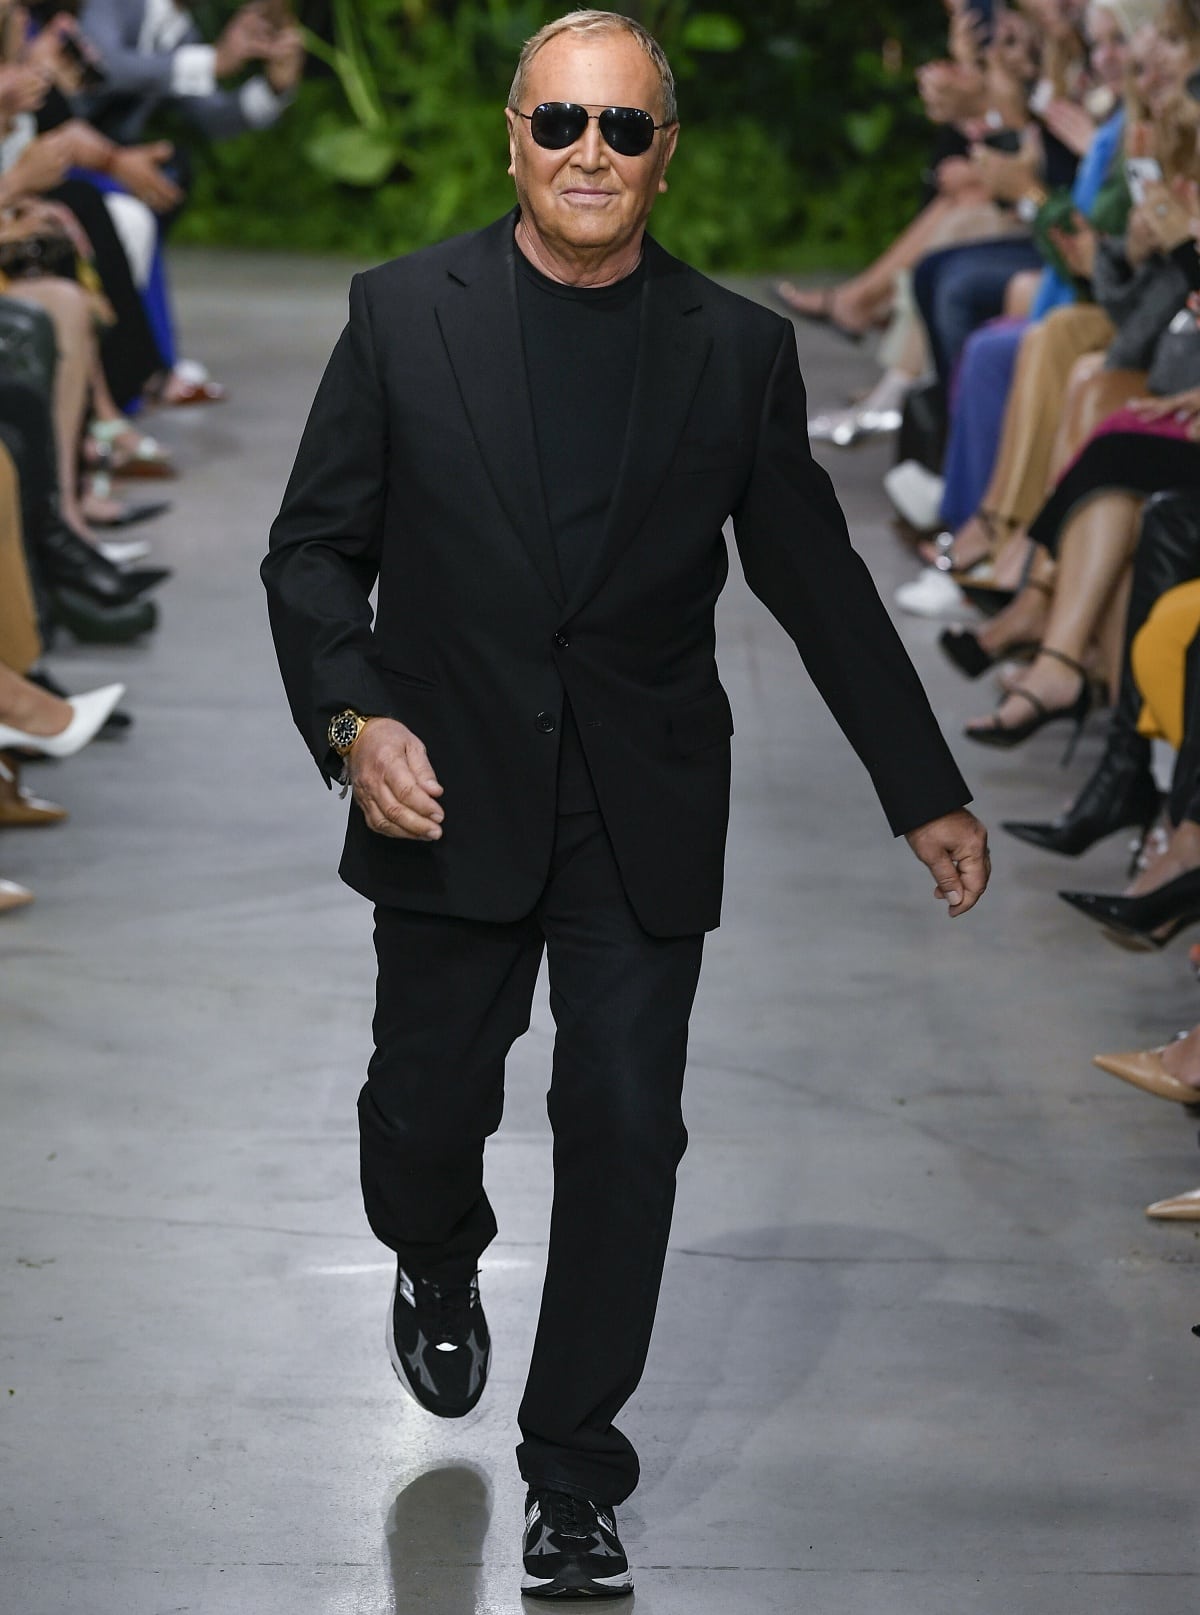 Michael Kors at the end of his Spring/Summer 2023 runway presentation during New York Fashion Week